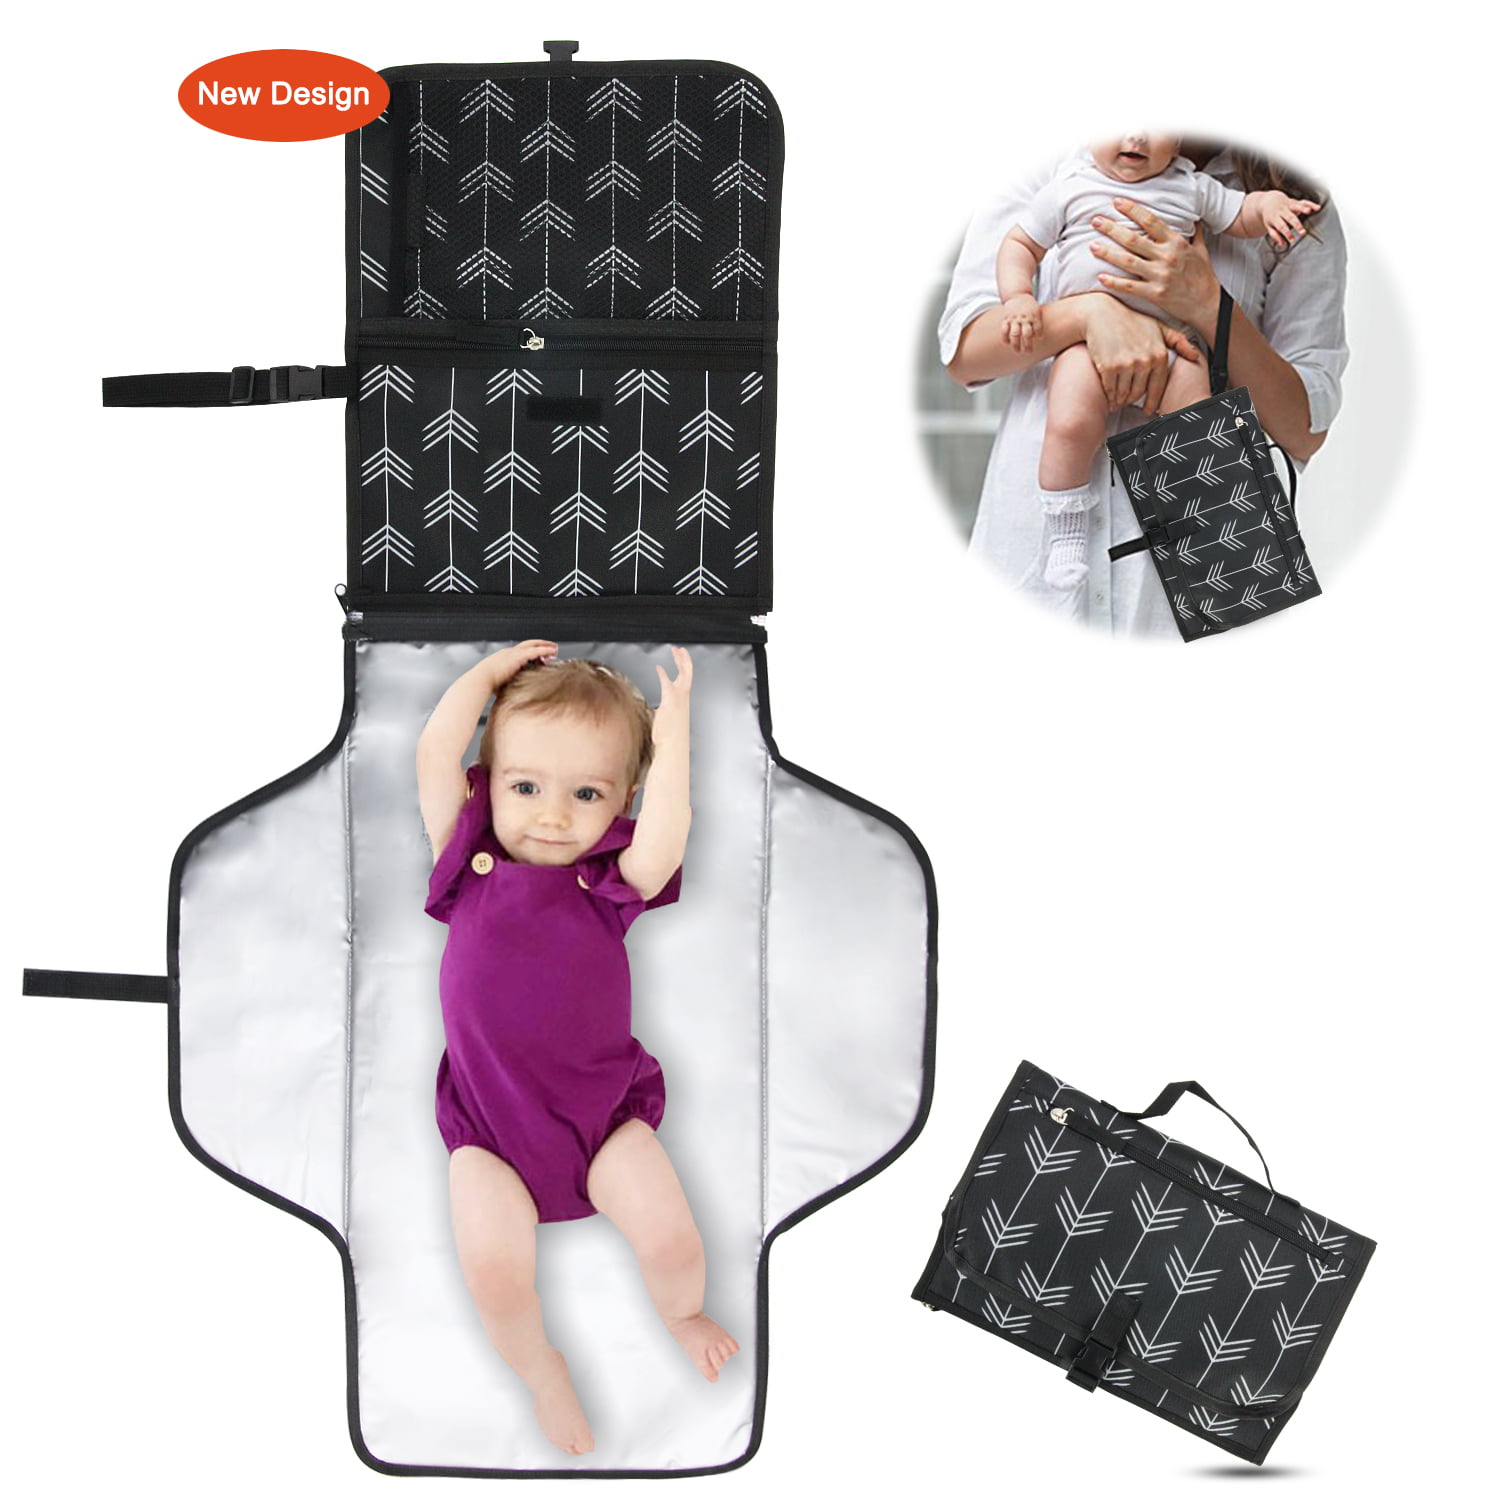 Baby Portable Changing Pad with Pockets - Diaper Clutch - Auchen  Lightweight Travel Mat Station Diaper Bag for Infants and Newborns -  Entirely Padded, Detachable and Wipeable Mat - Walmart.com